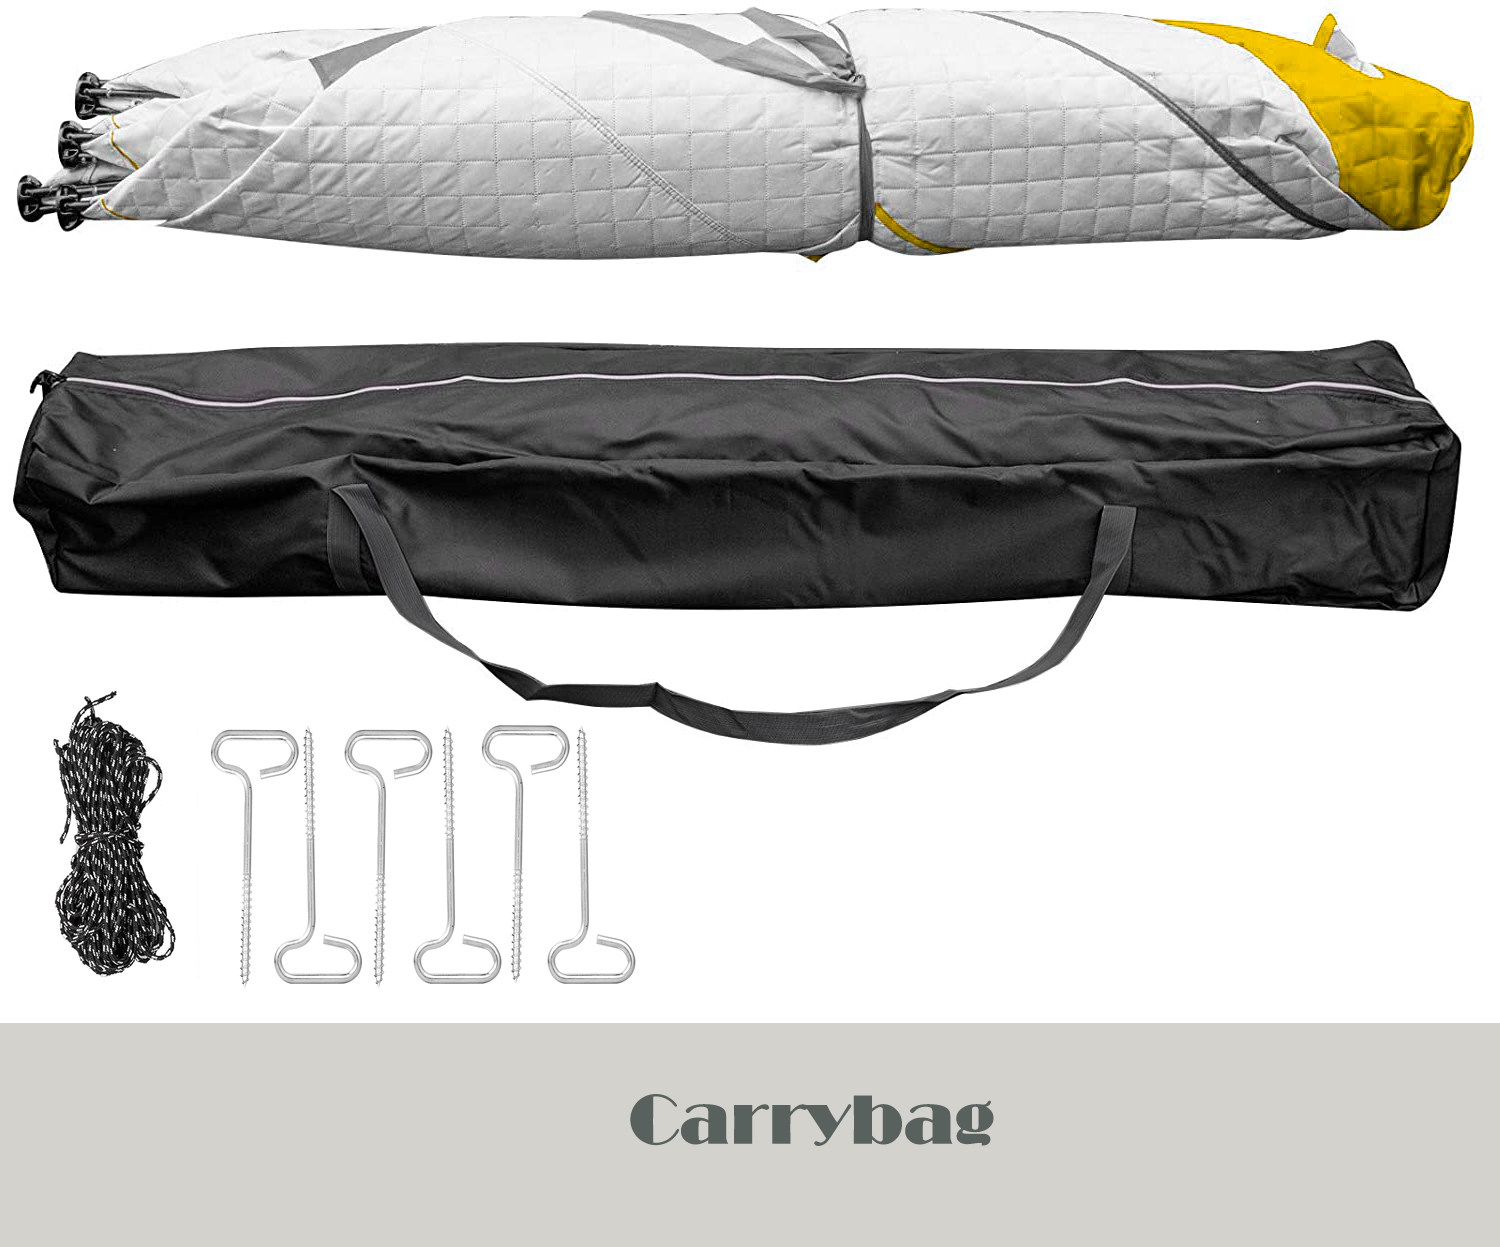 Ice Fishing Tent 5-6 Persons Waterproof with Thermal Layer Ventilation Windows Carrybag